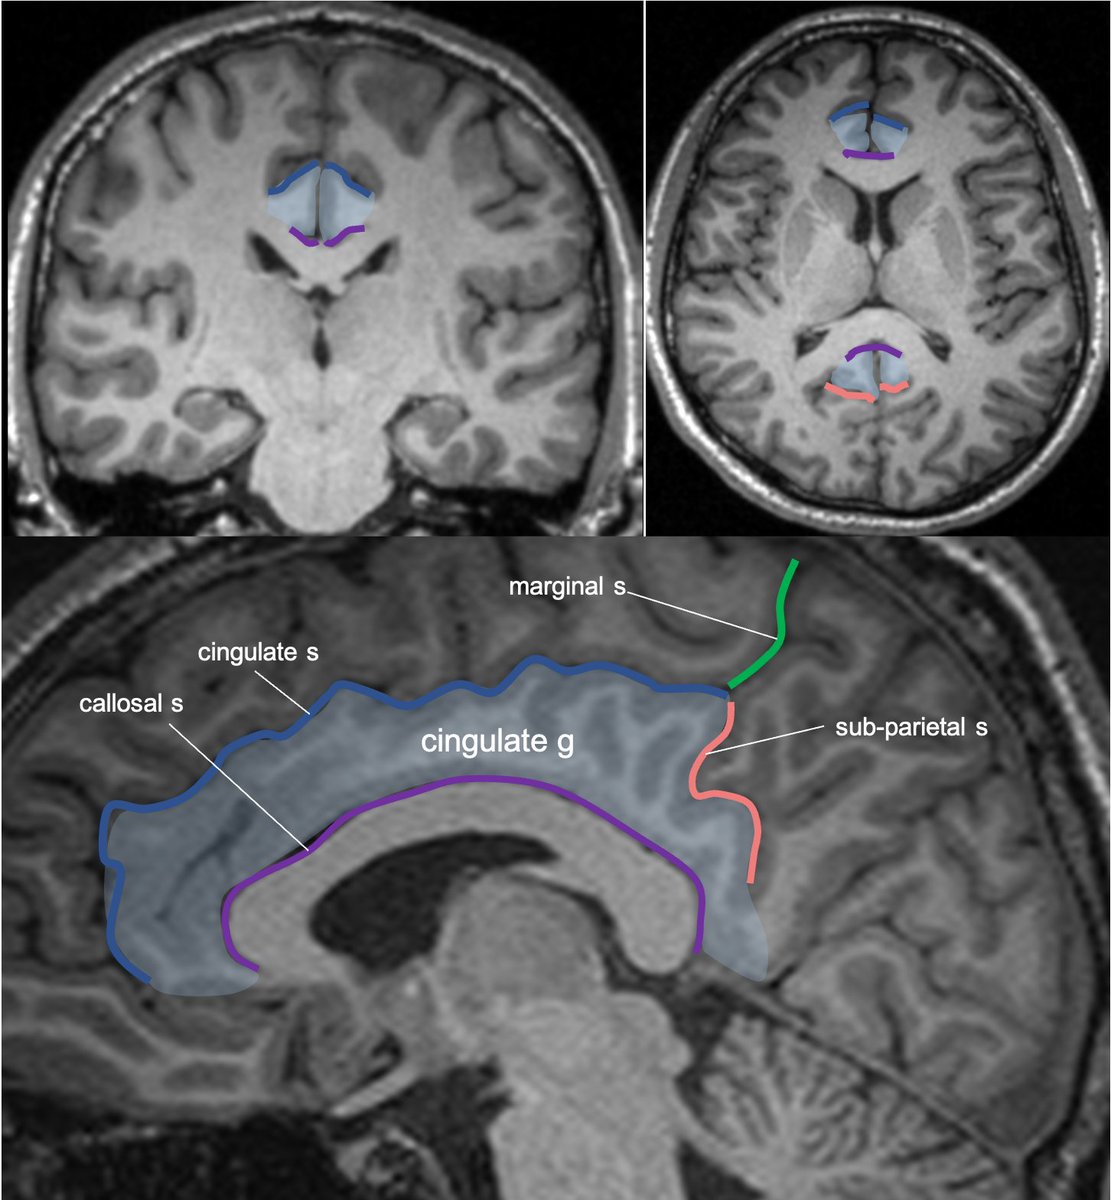 Cingulate g. is part of the limbic circuit; the post cingulate cortex (PCC) is important in default mode network, awareness, pain, and episodic memory retrieval. PCC including the retrosplenial cortex (which together some call restrosplenial gyrus) is involved by the tumor. 11/13